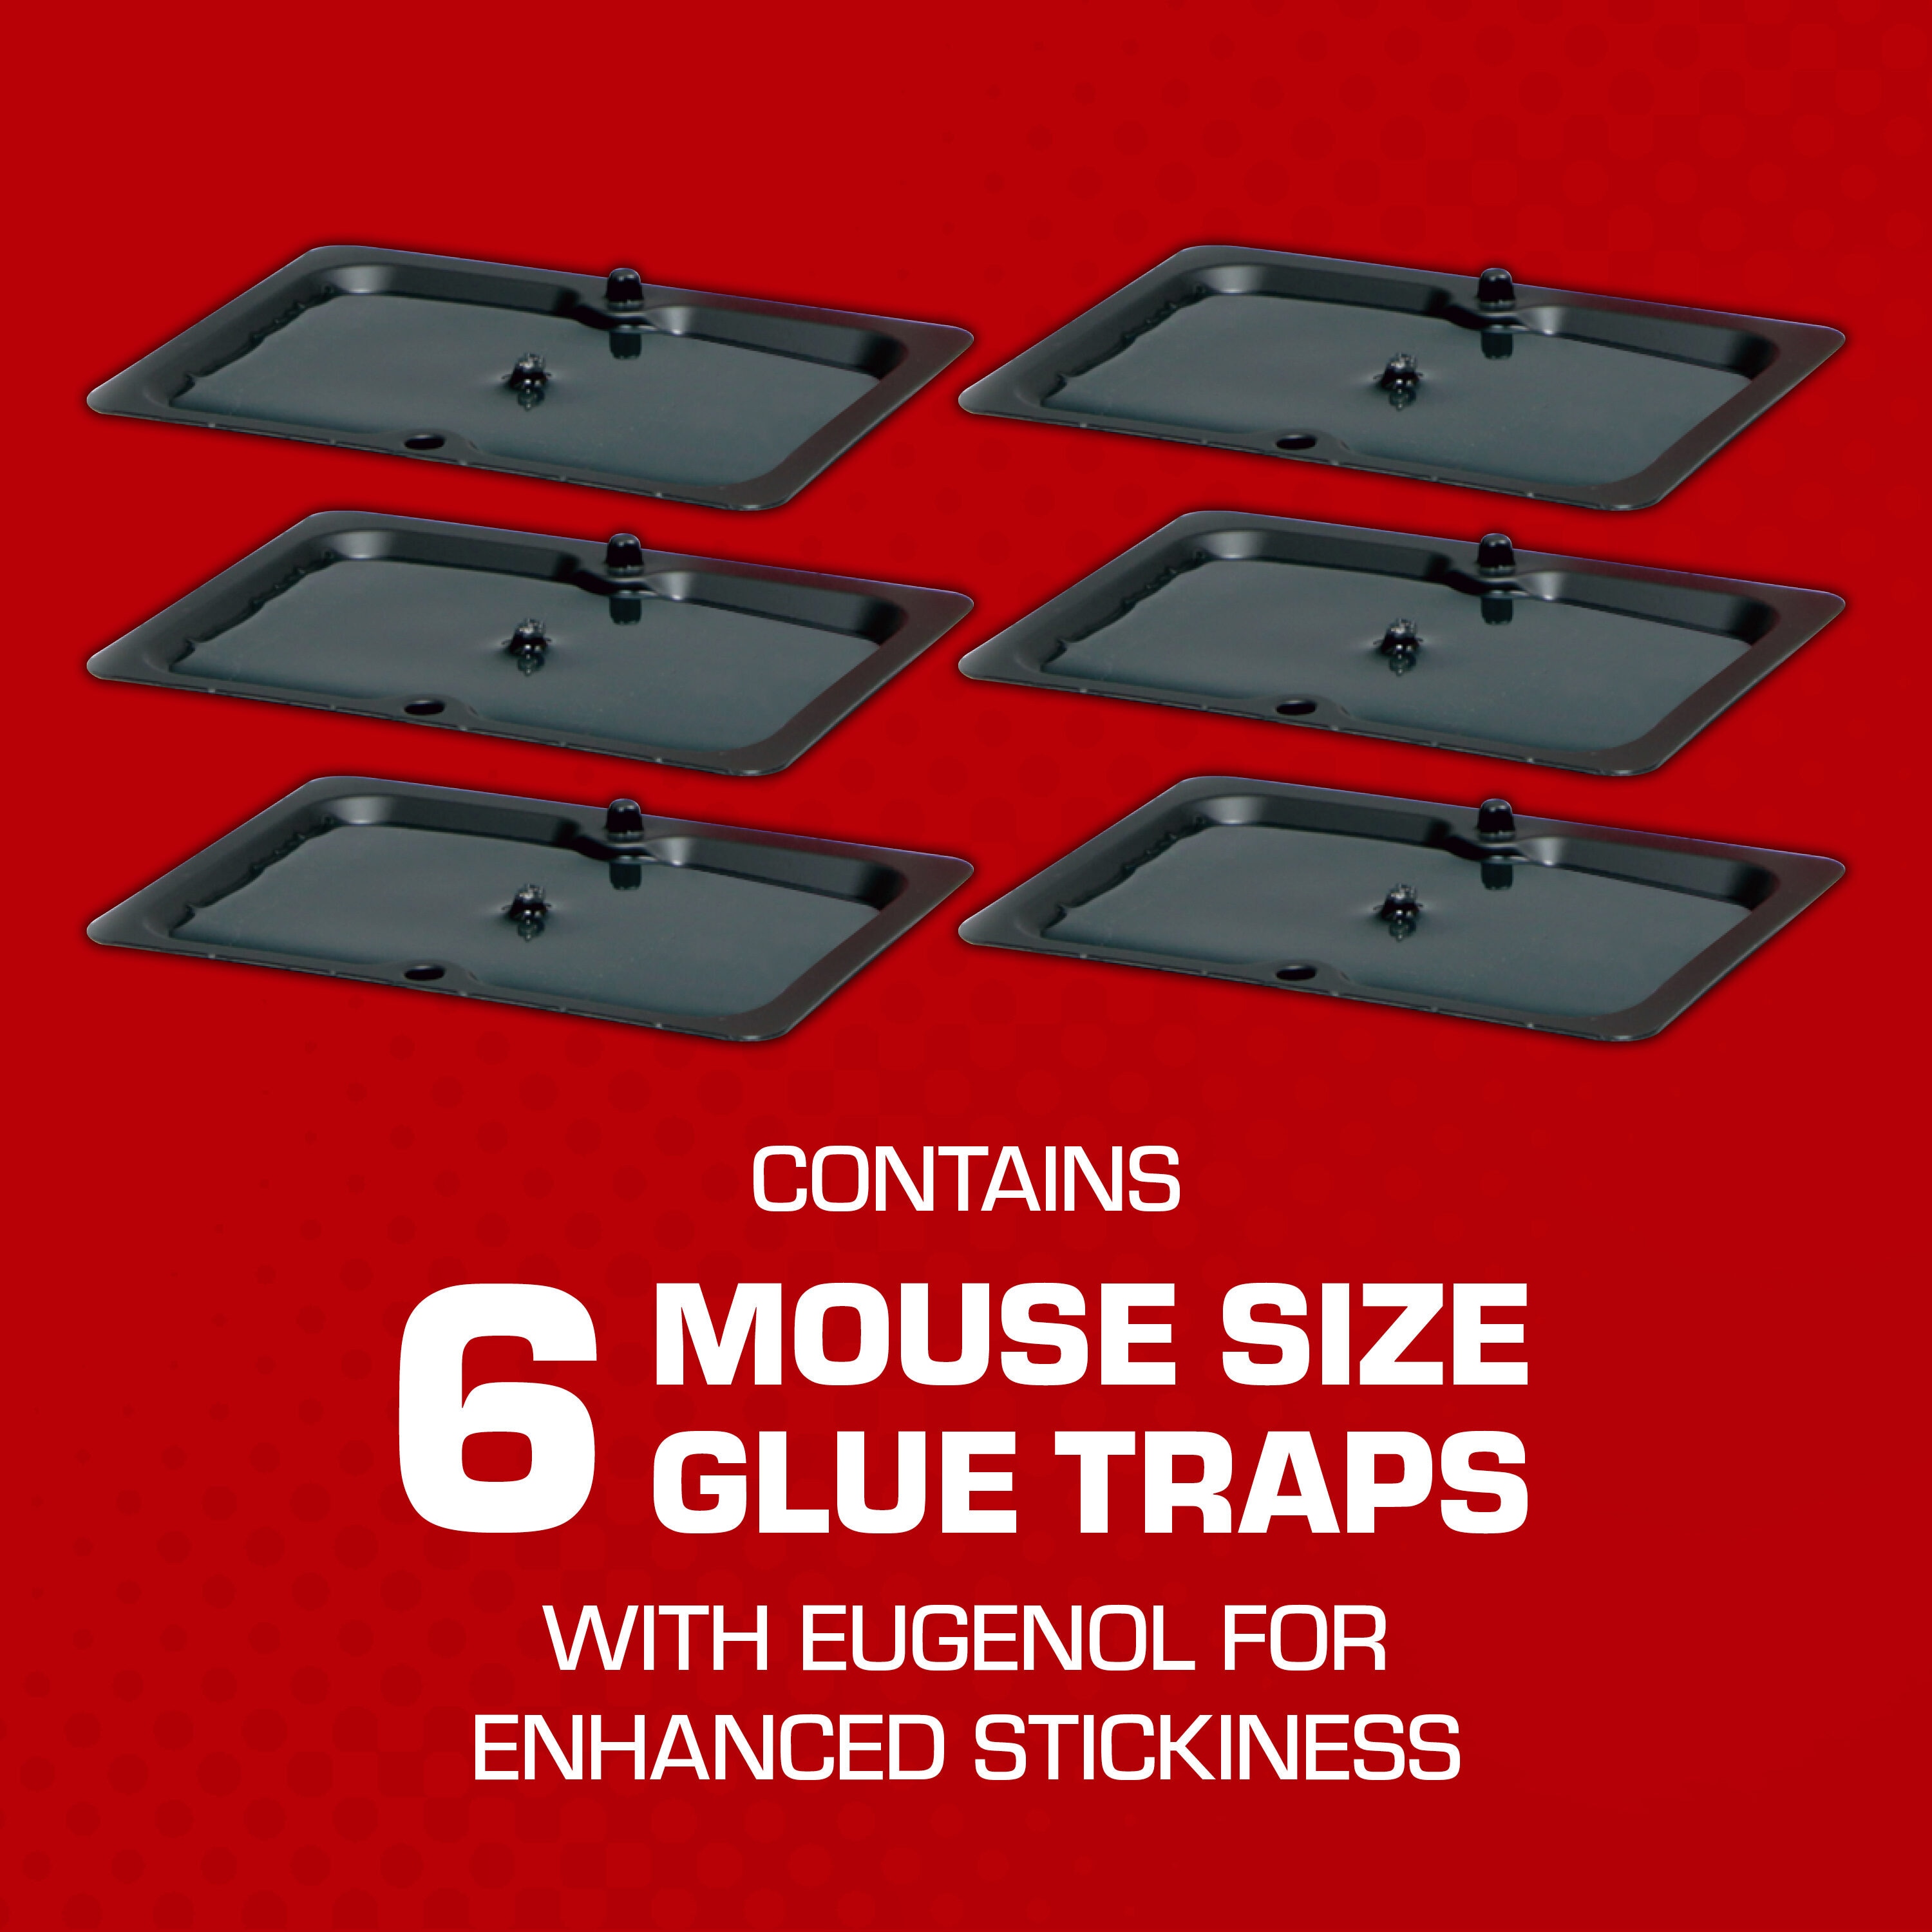 Tomcat Super Hold Glue Traps Mouse Size, Ready-To-Use, 4 Traps 